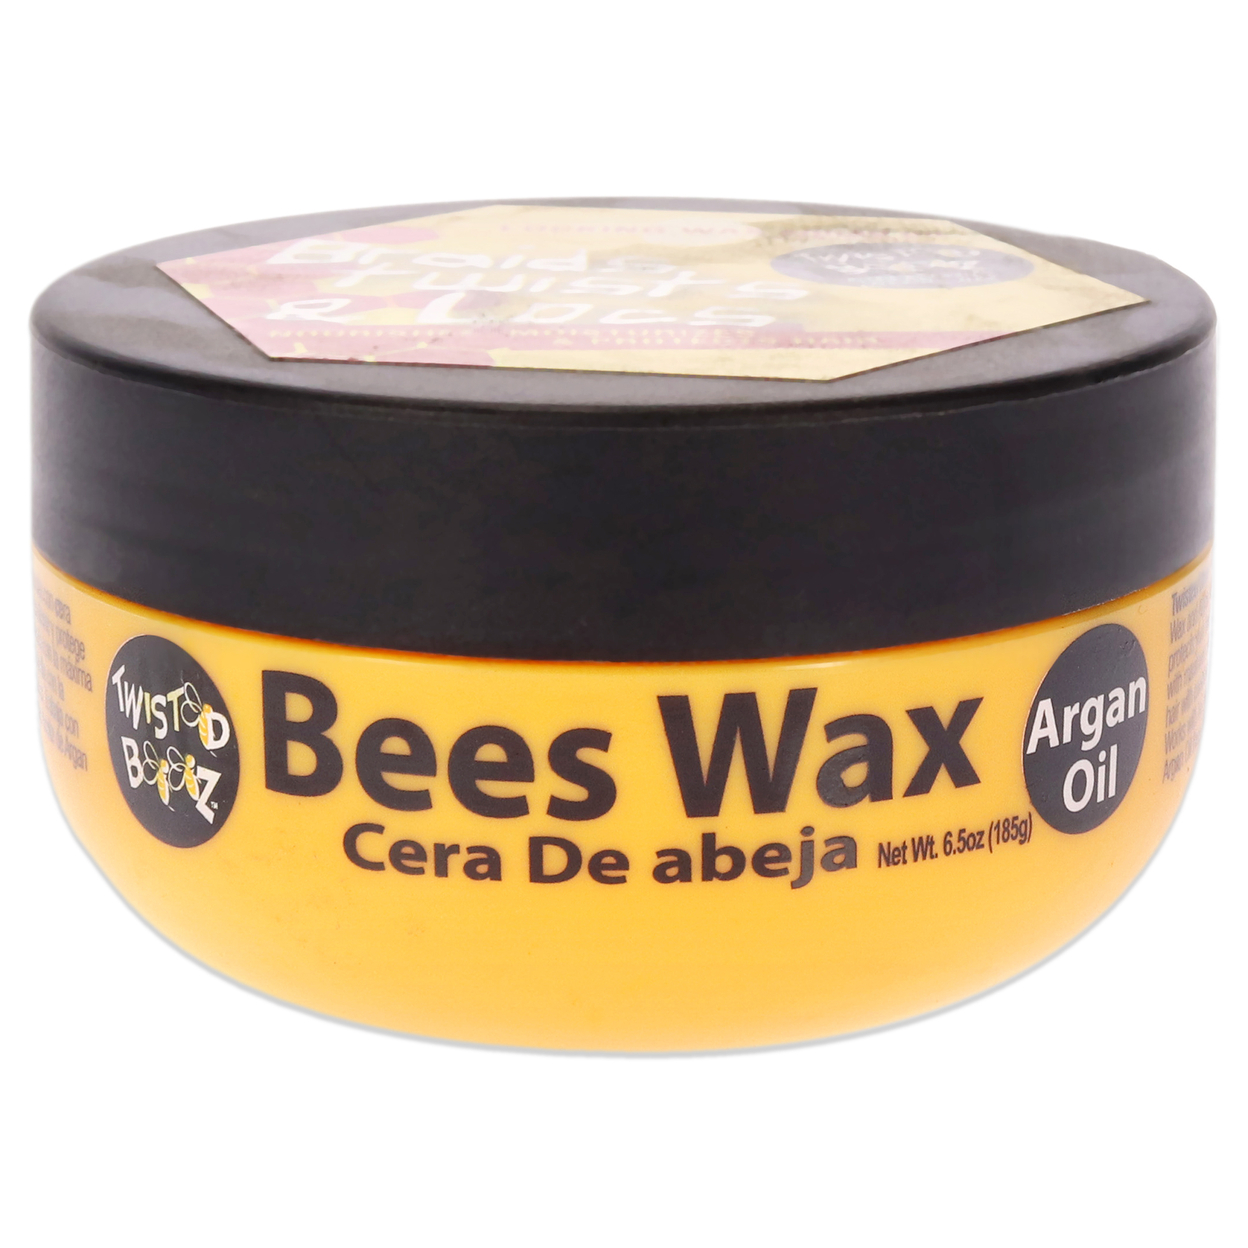 Ecoco Twisted Bees Wax - Arganoil 6.5 Oz